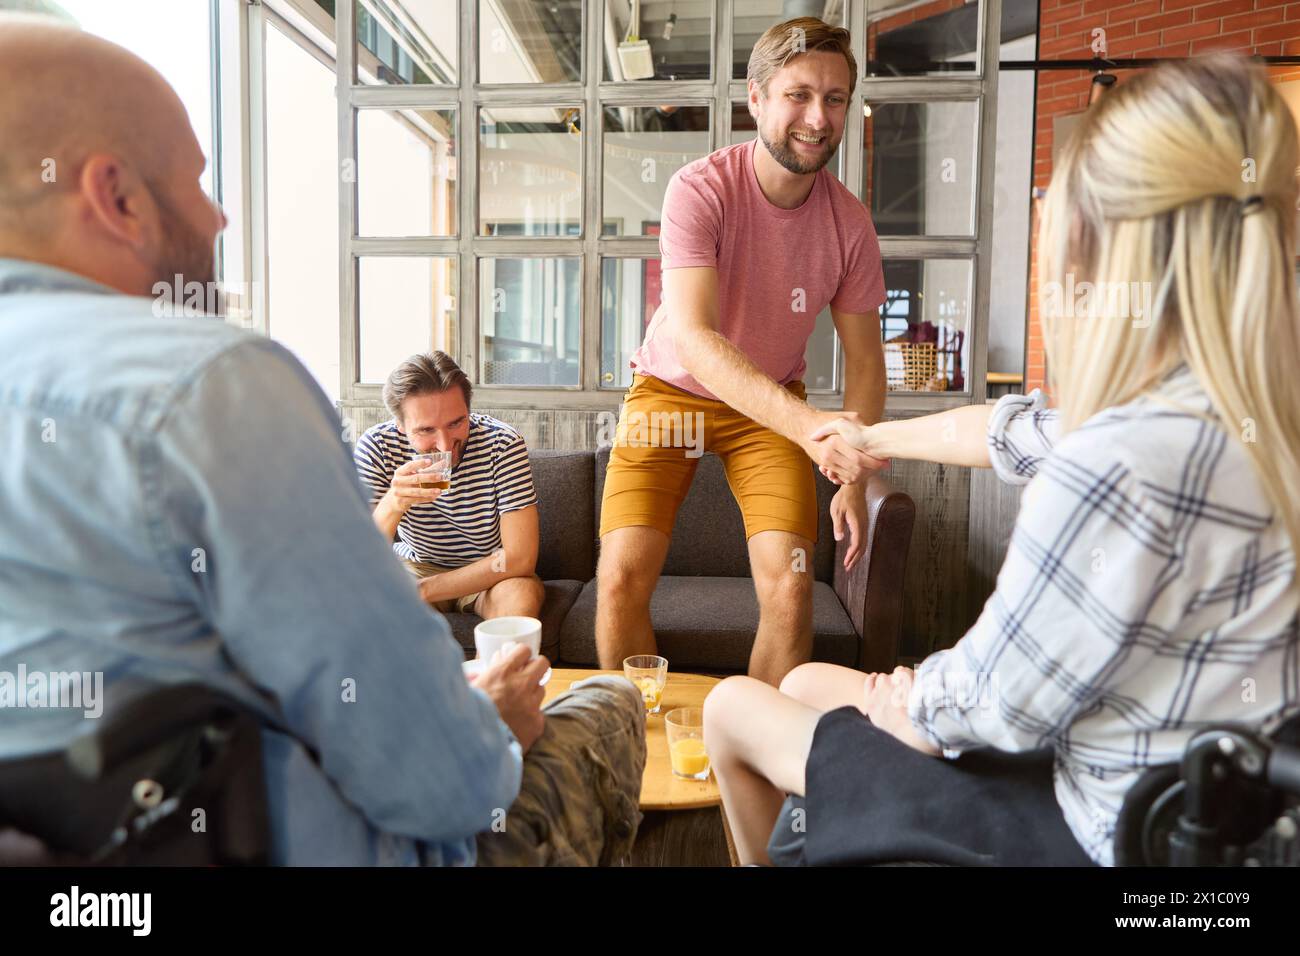 A friendly meeting in a cozy cafe with a diverse group of friends, including a person using a wheelchair. They are engaged in conversation, sharing la Stock Photo